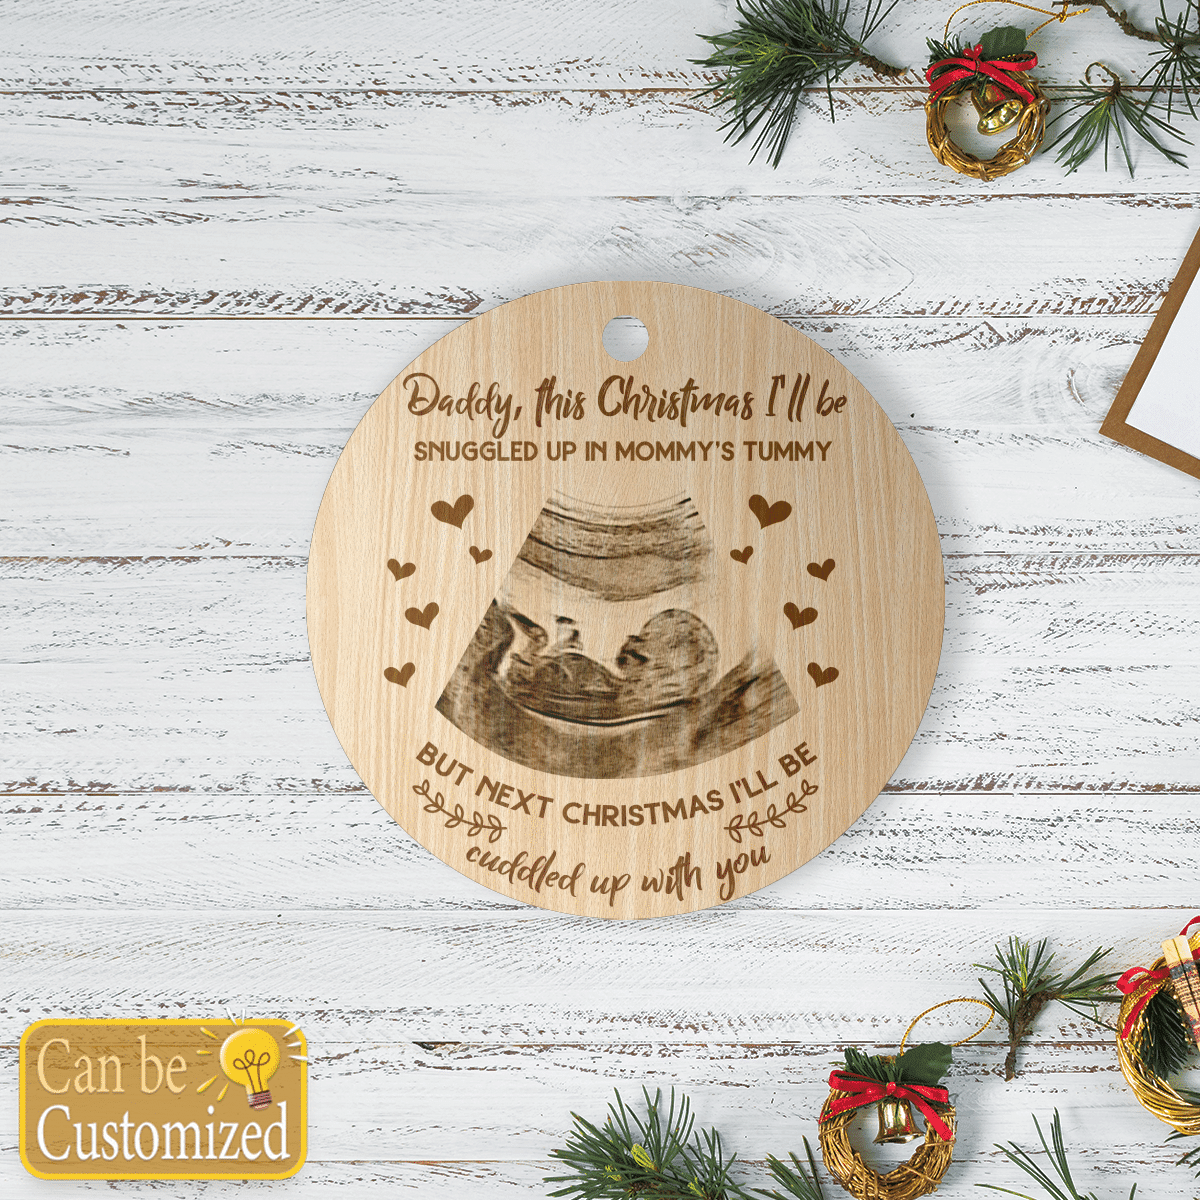 Personalized Daddy Next Christmas I'll Be Cuddled Up With You Ornament